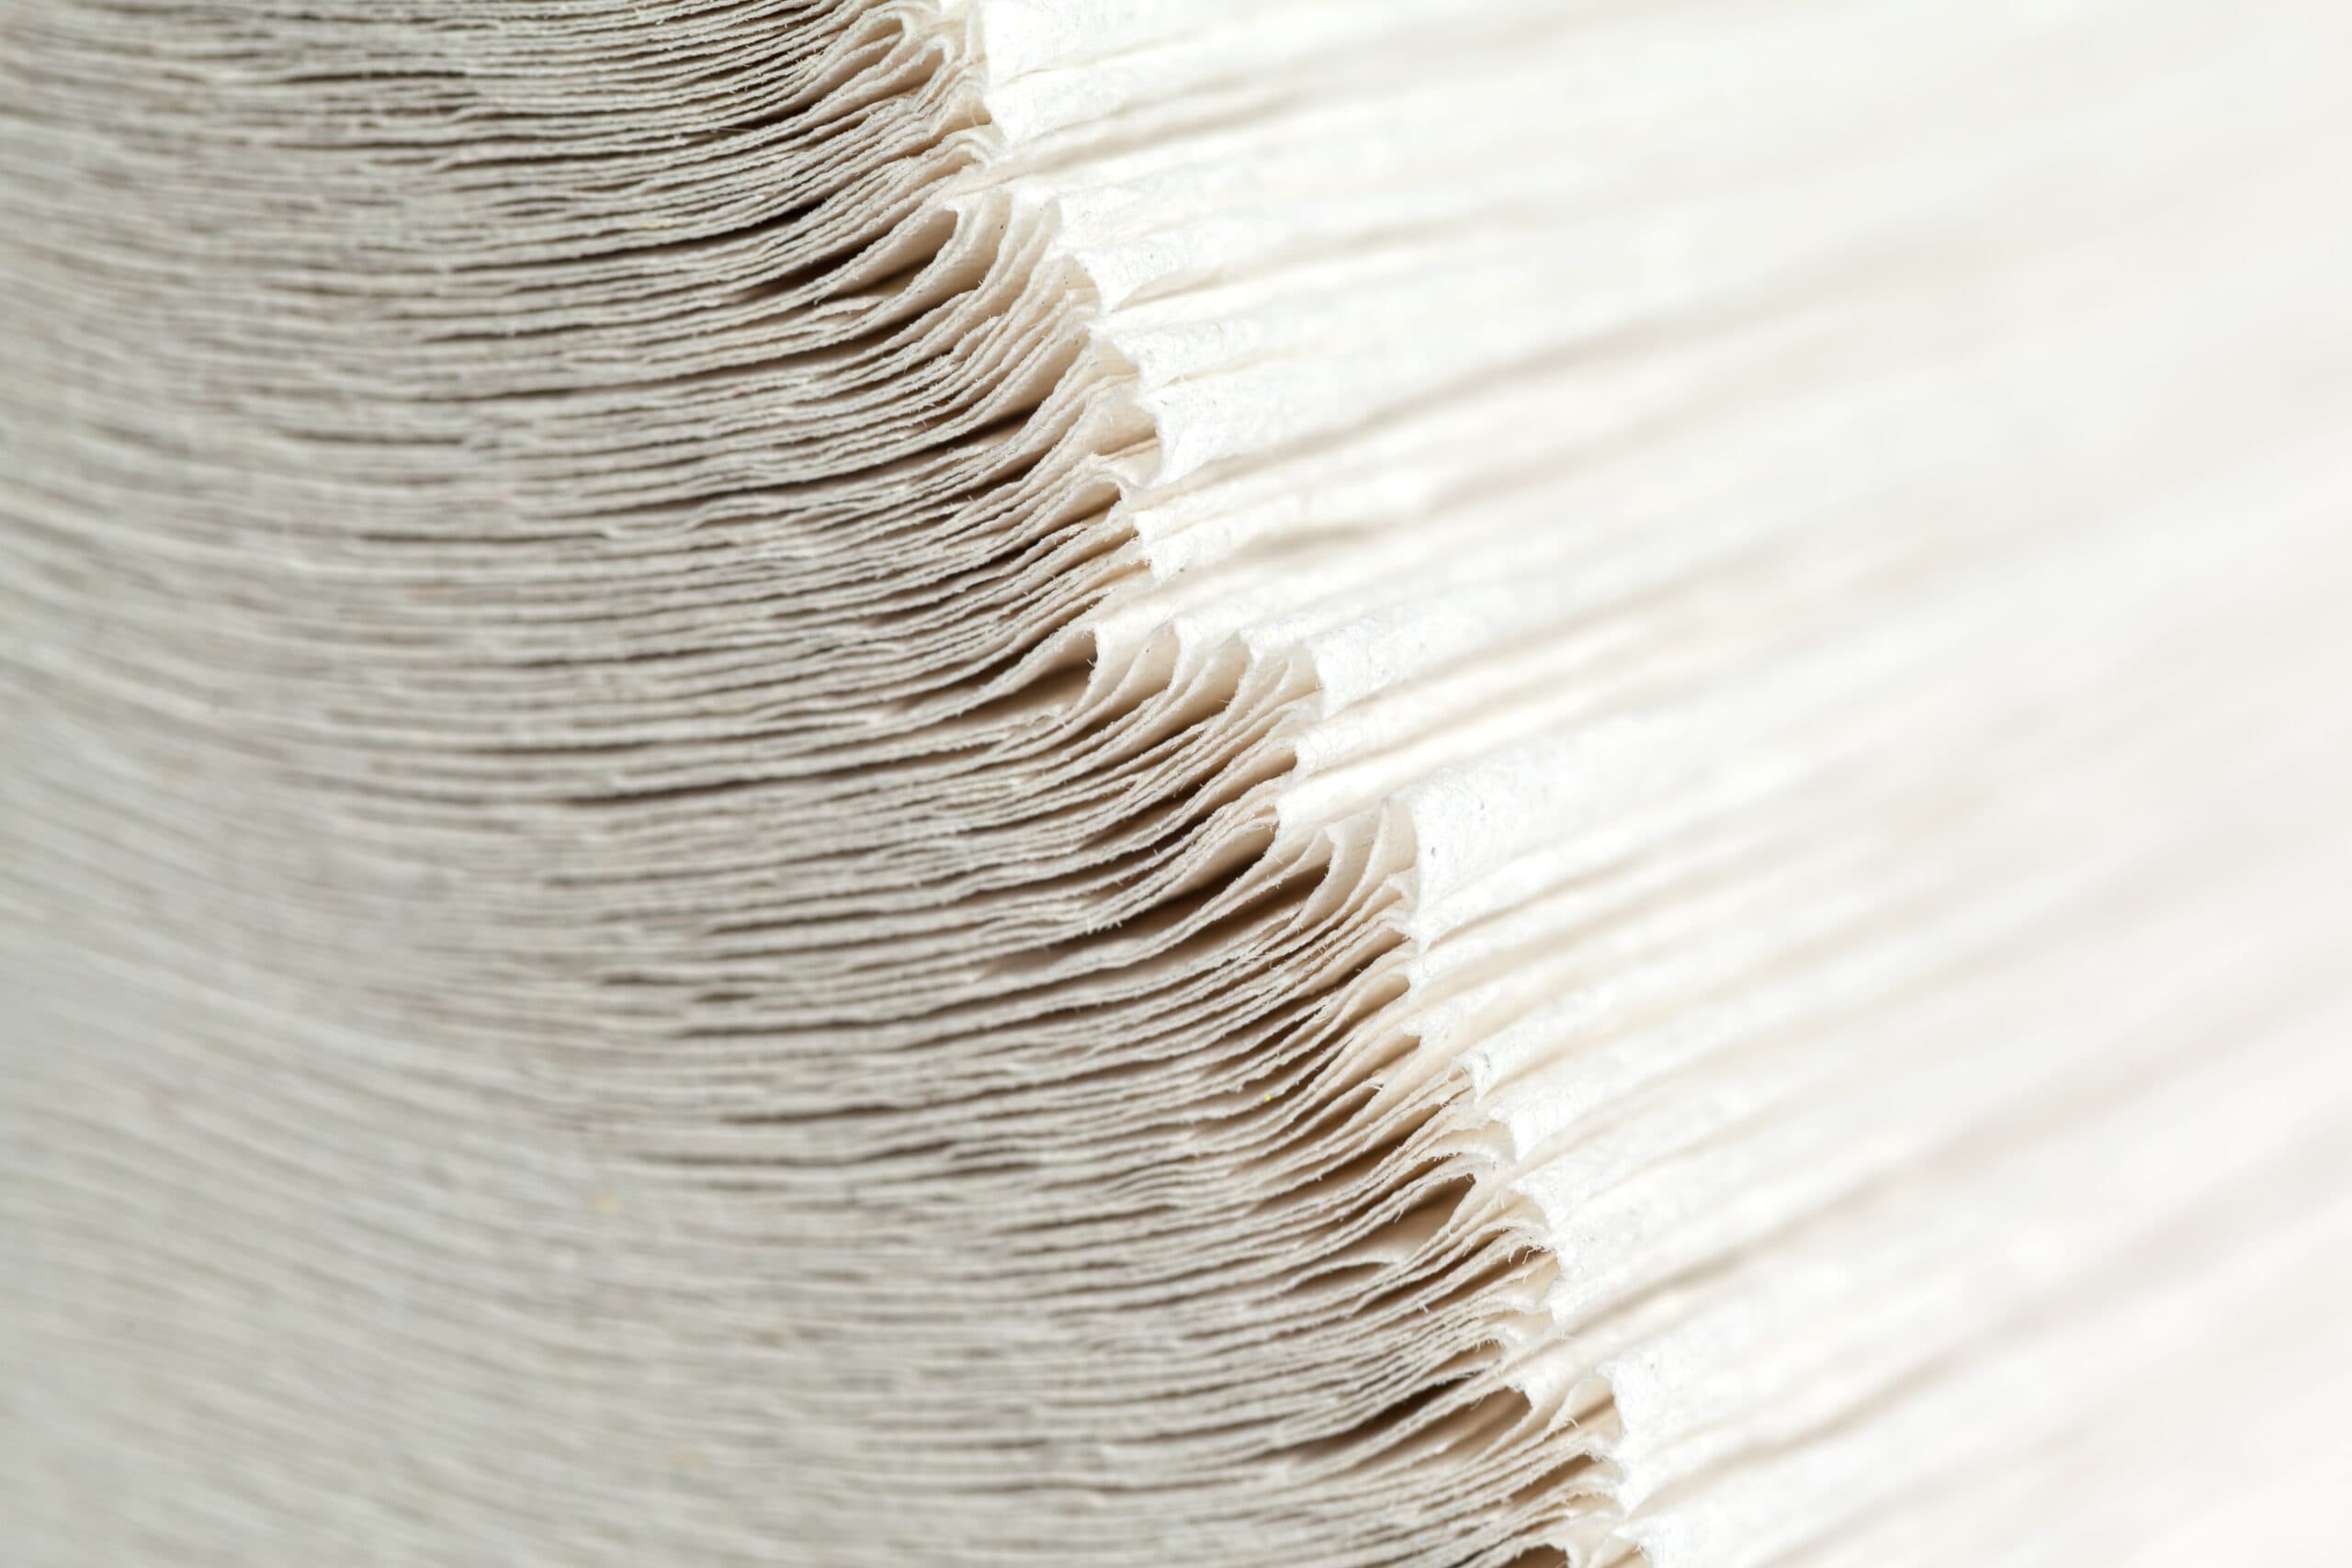 Closeup of white paper towels stack